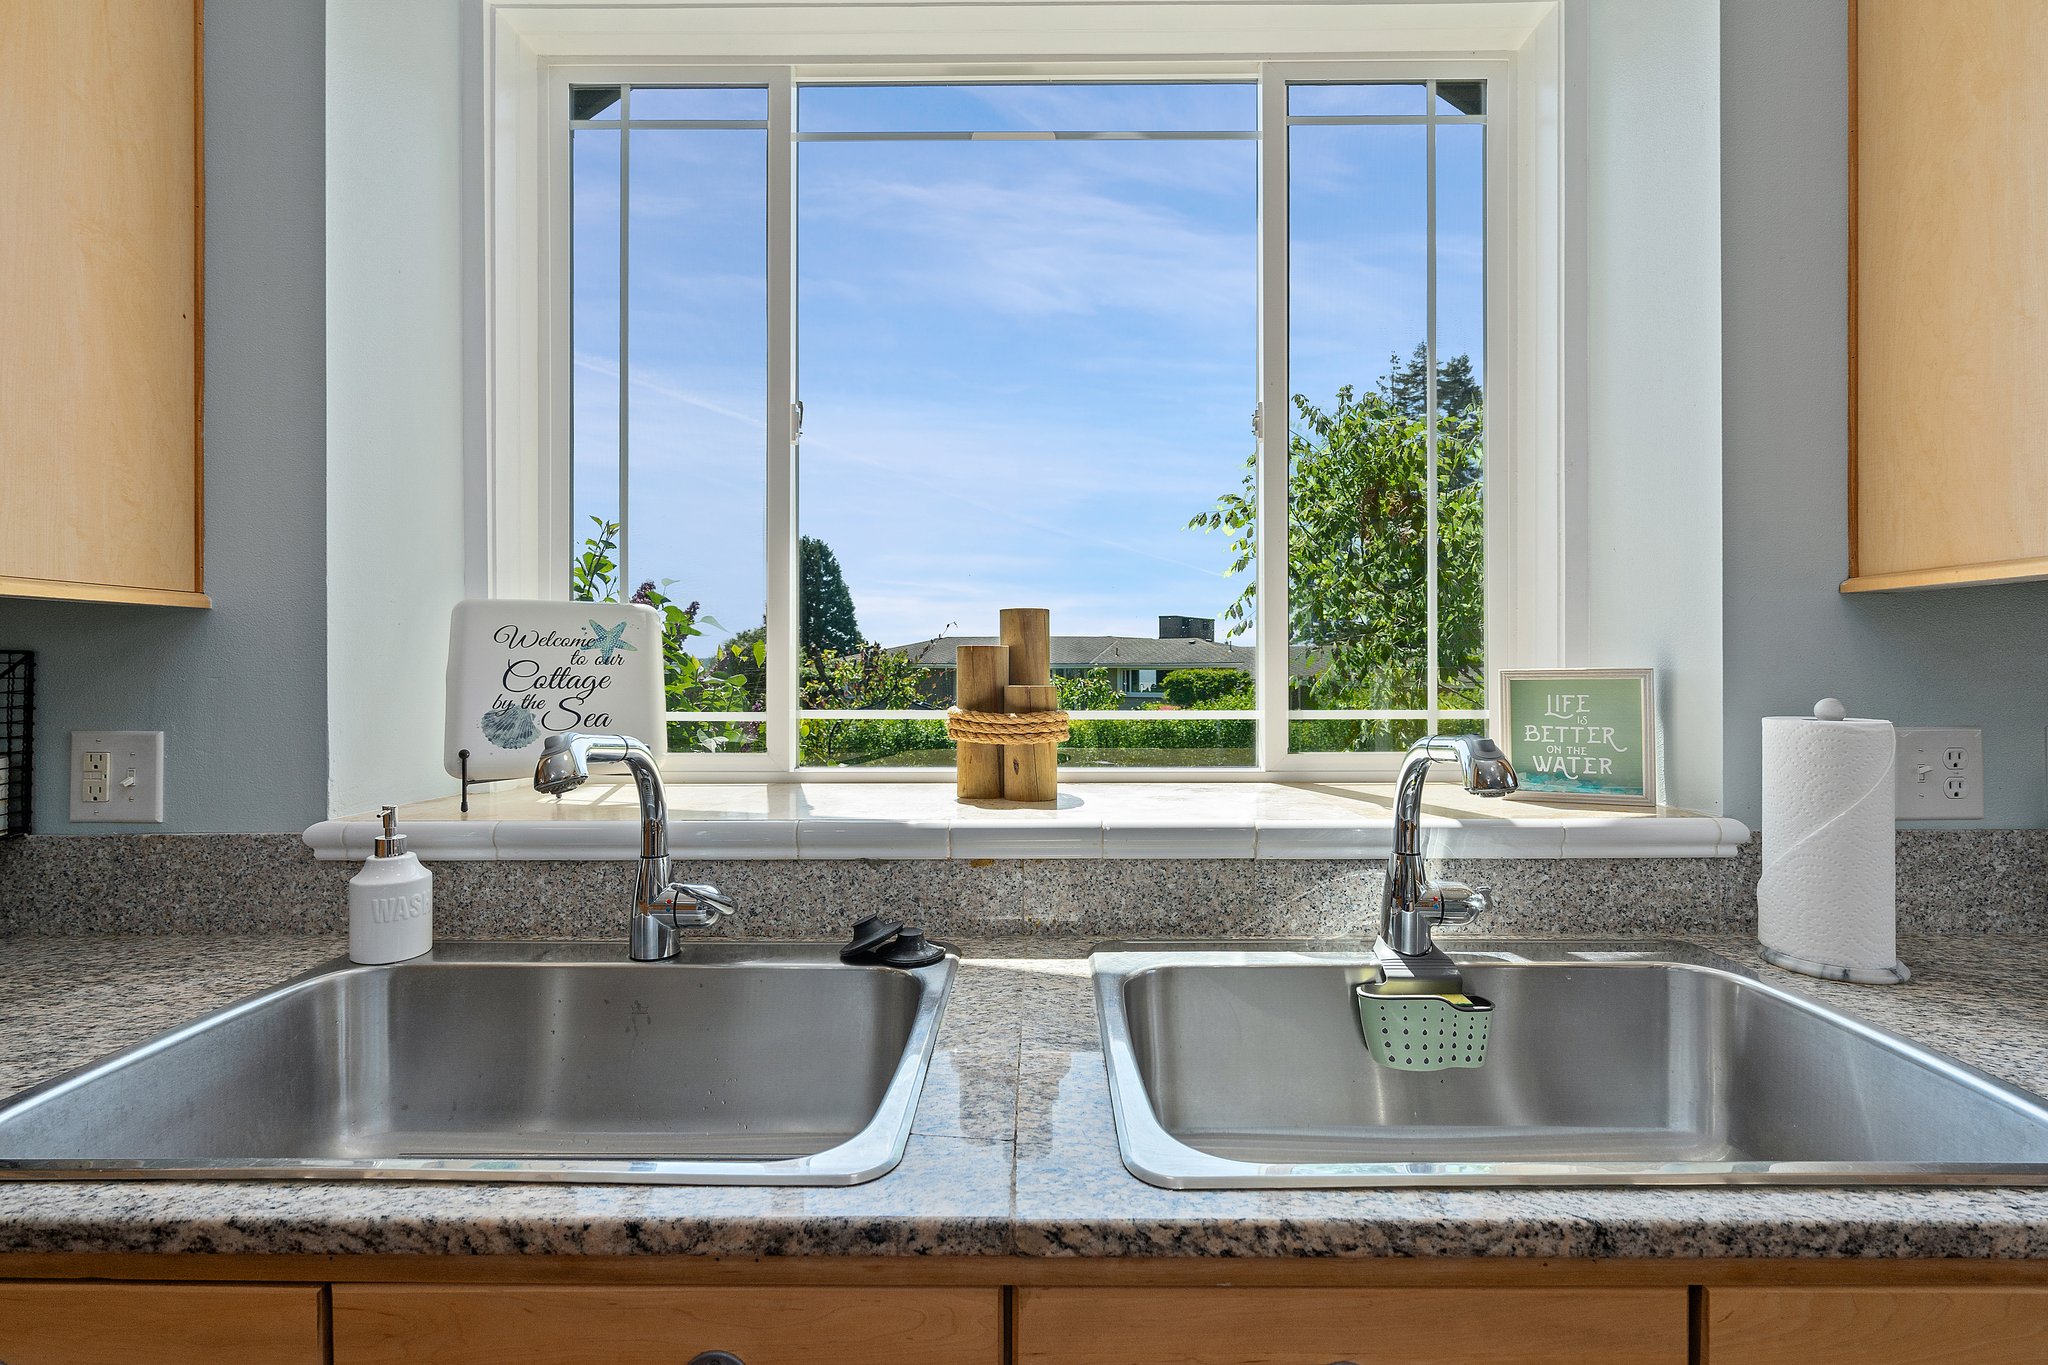 Scenic dishwashing: A kitchen sink with an incredible view